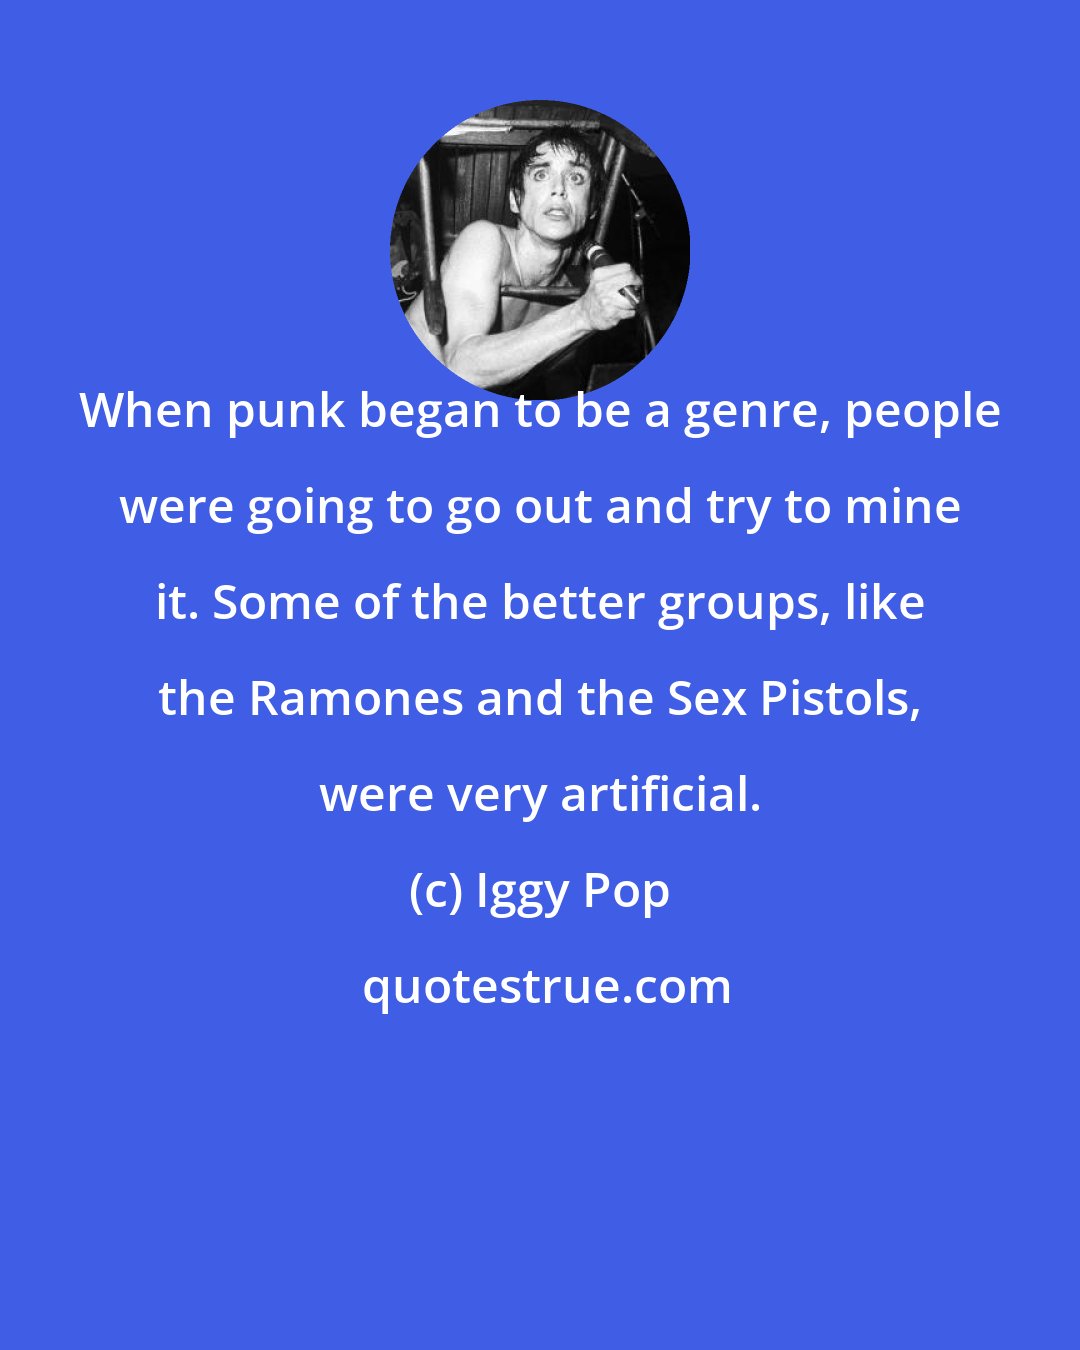 Iggy Pop: When punk began to be a genre, people were going to go out and try to mine it. Some of the better groups, like the Ramones and the Sex Pistols, were very artificial.